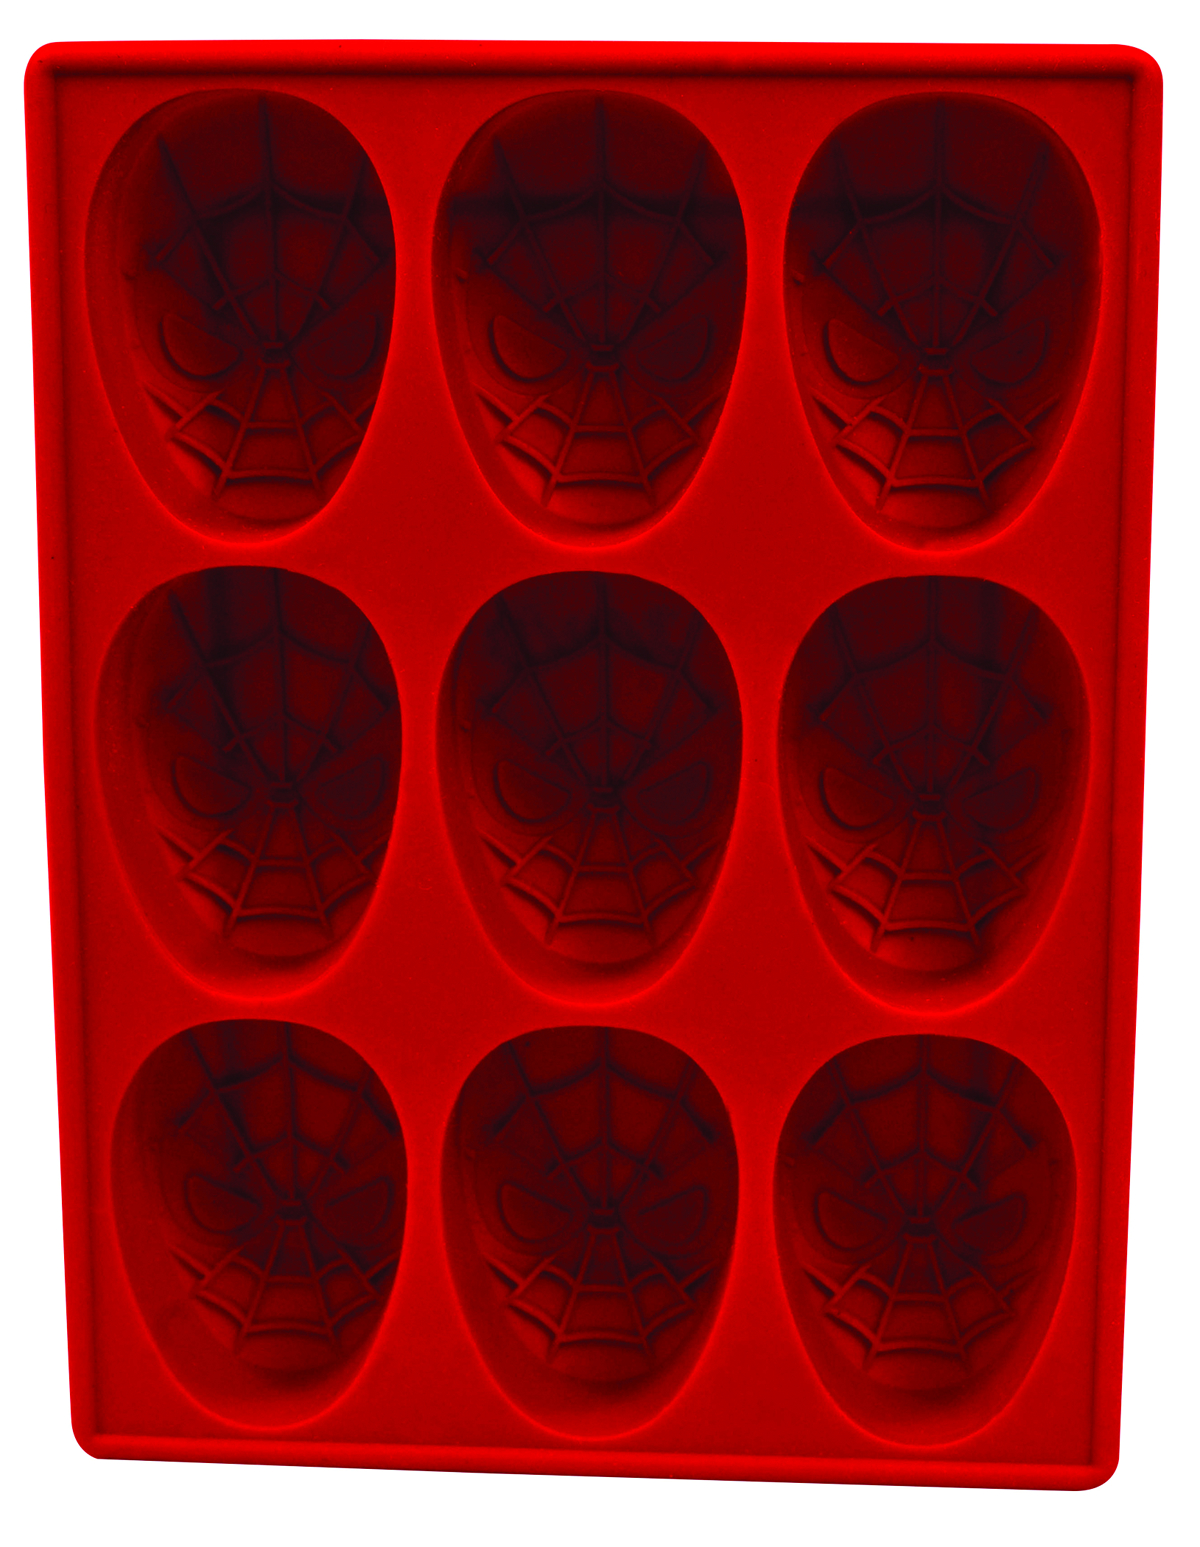 MARVEL SPIDER-MAN SILICONE TRAY